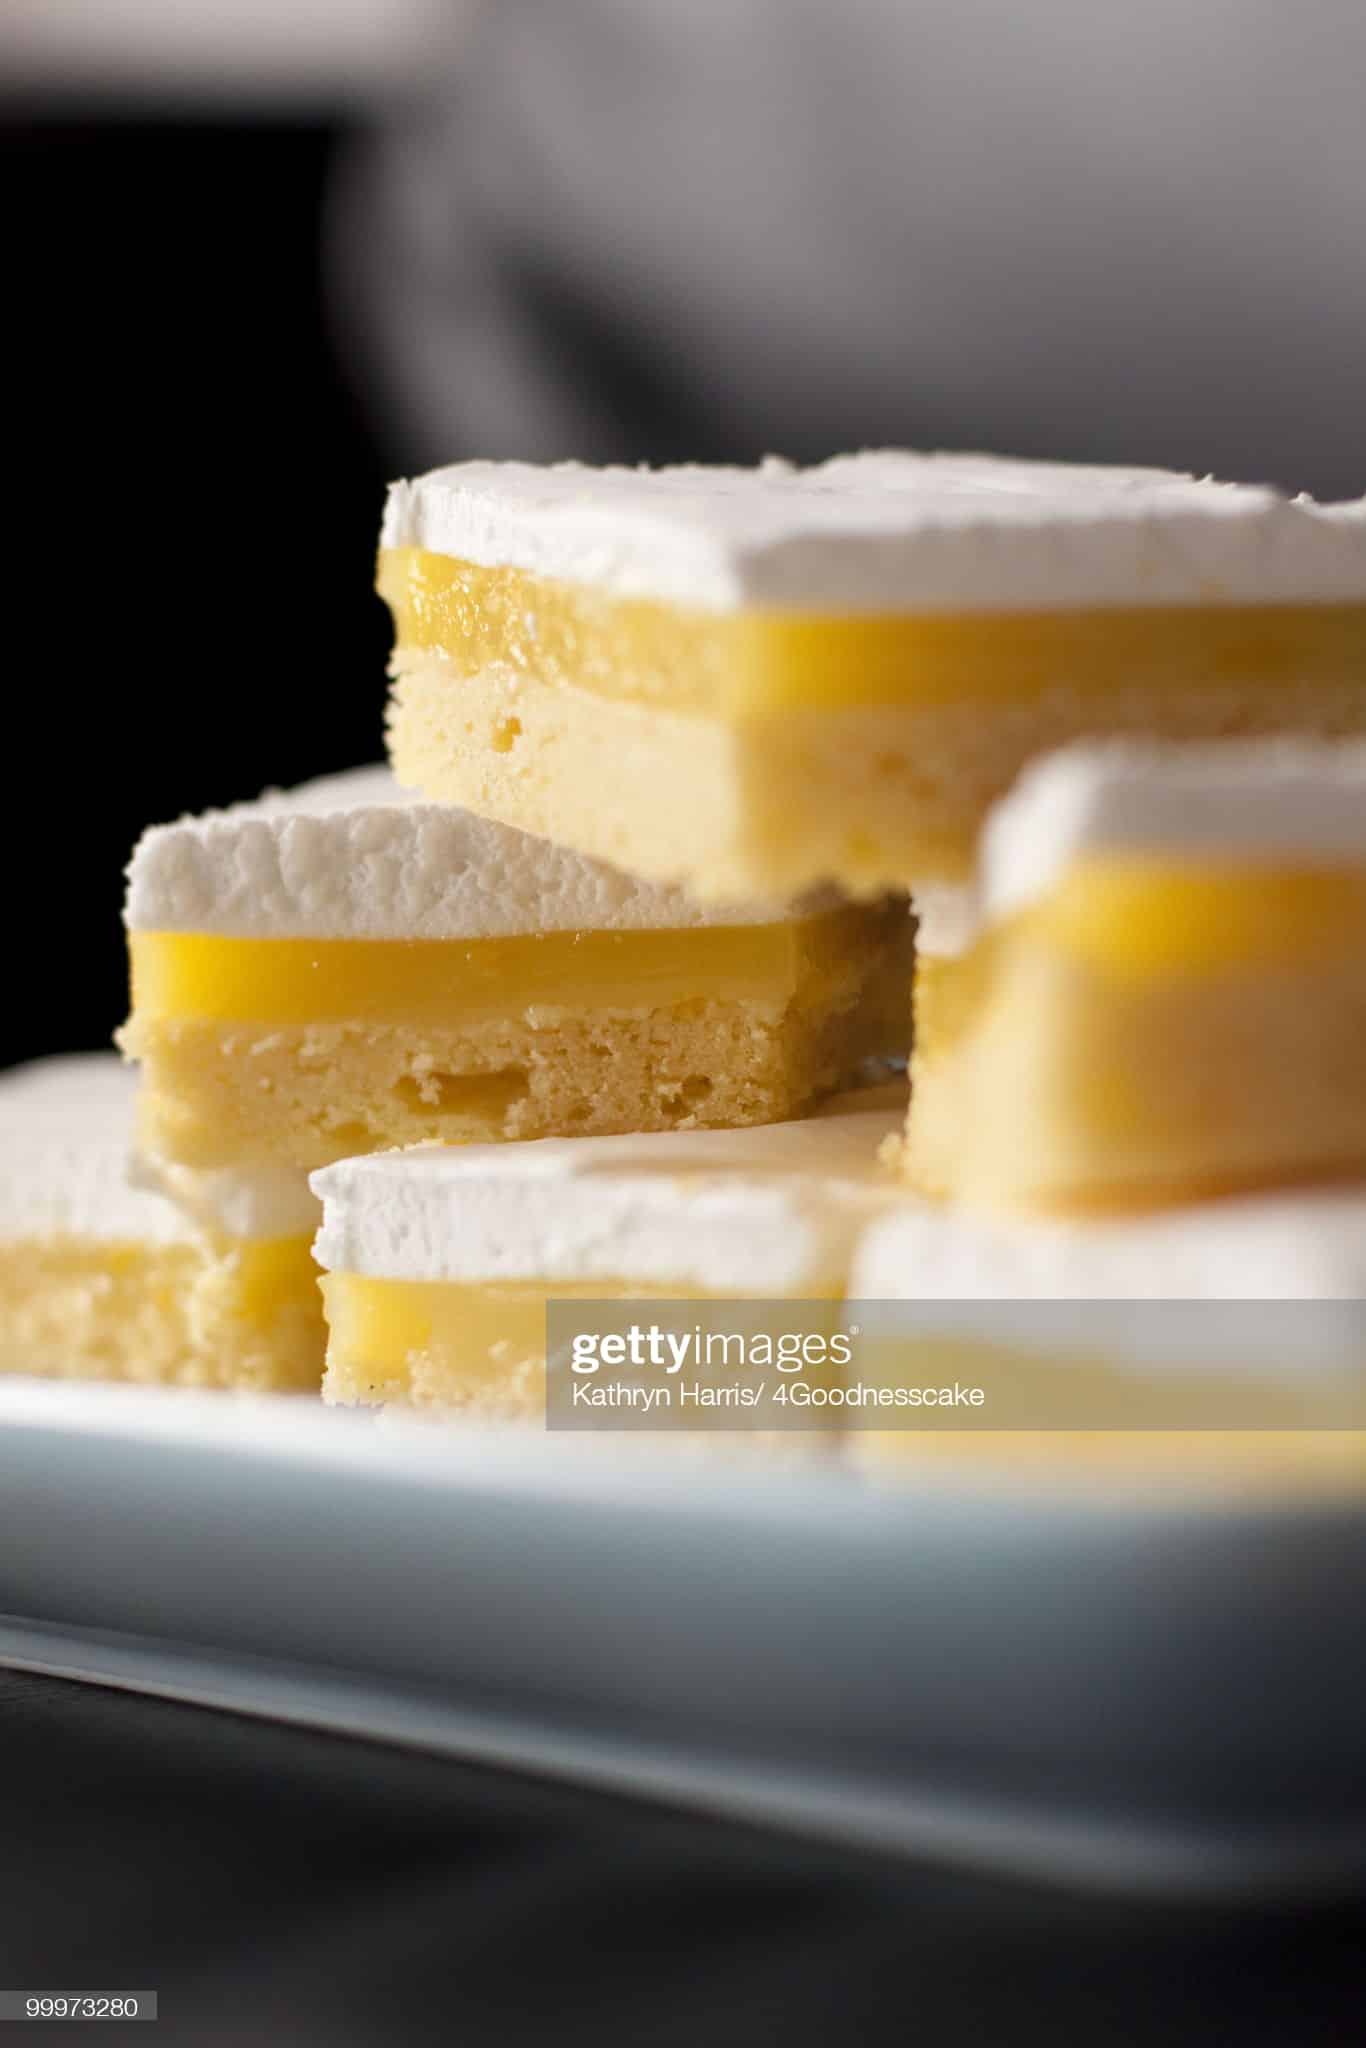 Home baked lemon bars with marshmallow topping.